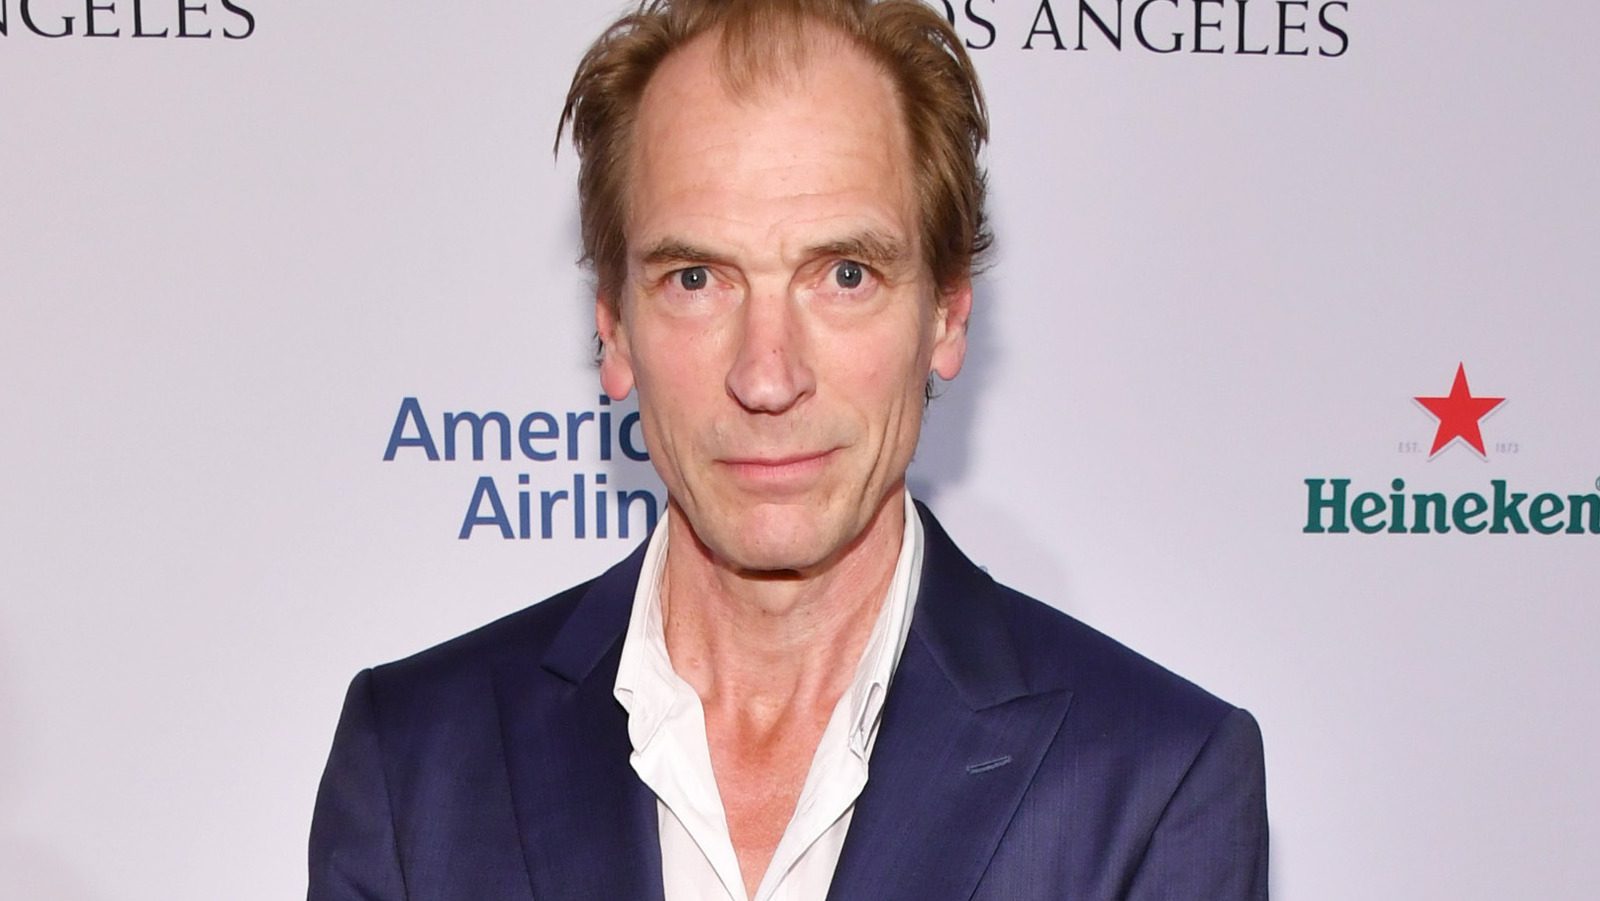 A Room With A View Star Julian Sands Dead At 65